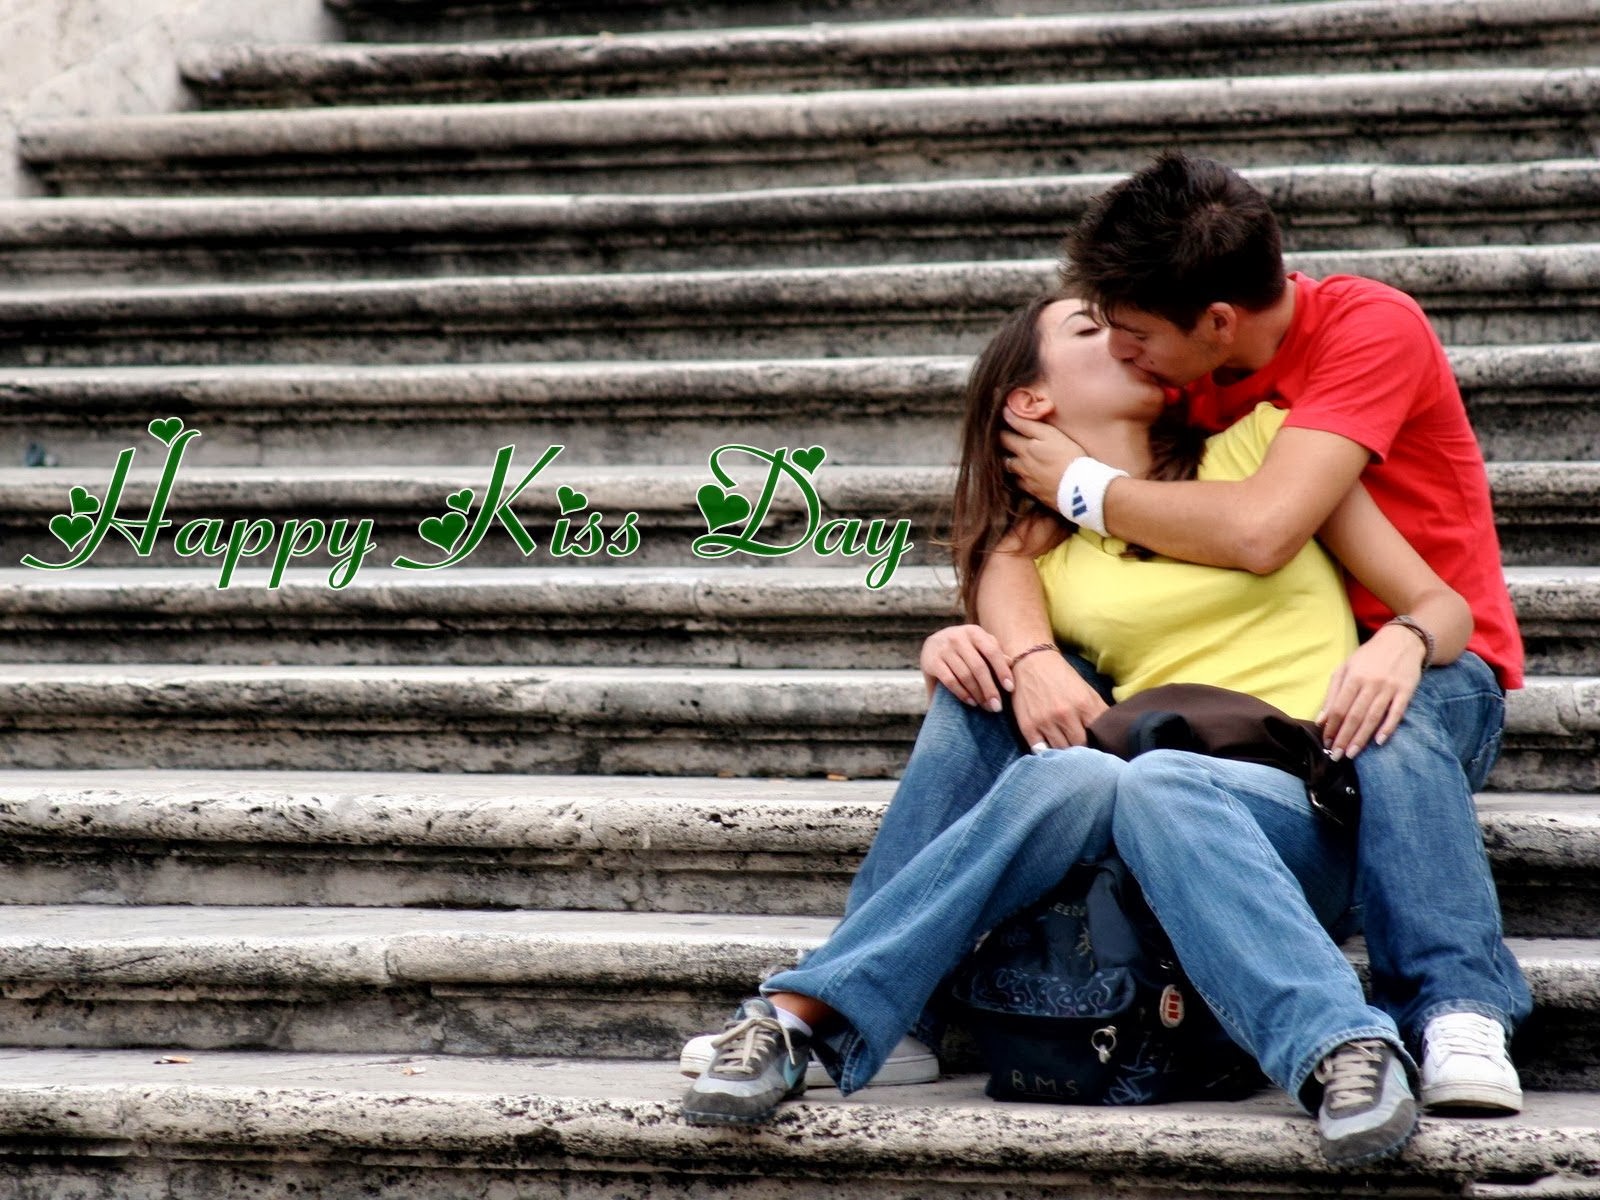 Polite Shayari,Love Sms,Poetry Sms,Funny Sms: Happy Kiss Day mms